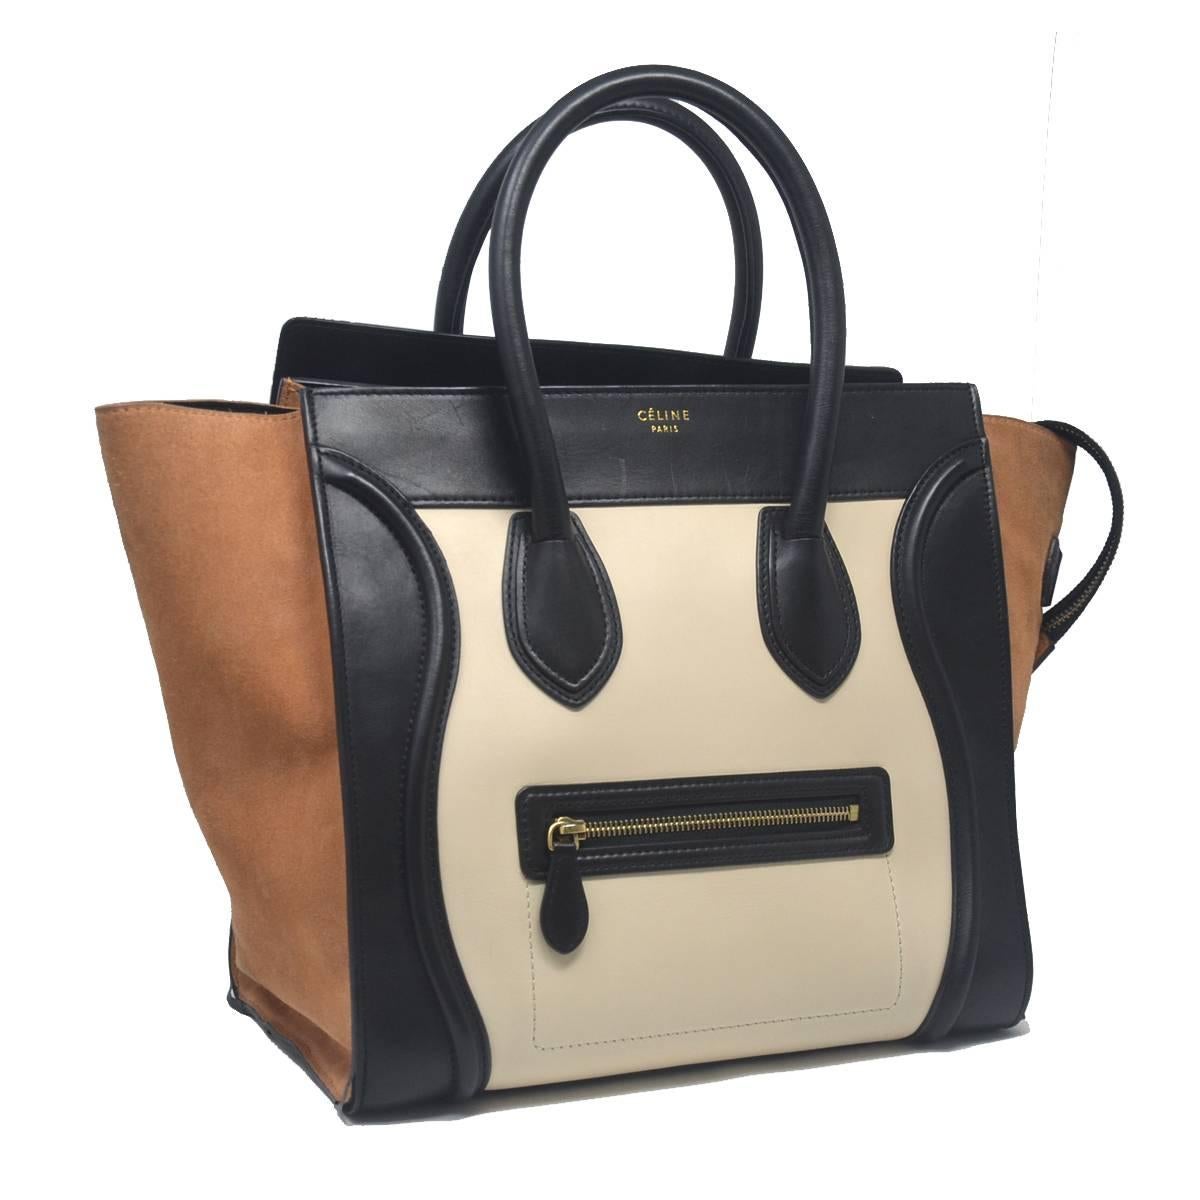 Company-Celine
Model-Mini Luggage
Color-Tri-Color Beige, Black and Brown
Date Code-S-SA-0112 S-CU-0112
Material-Beige and Black Leather / Brown Suede
Measurements-12